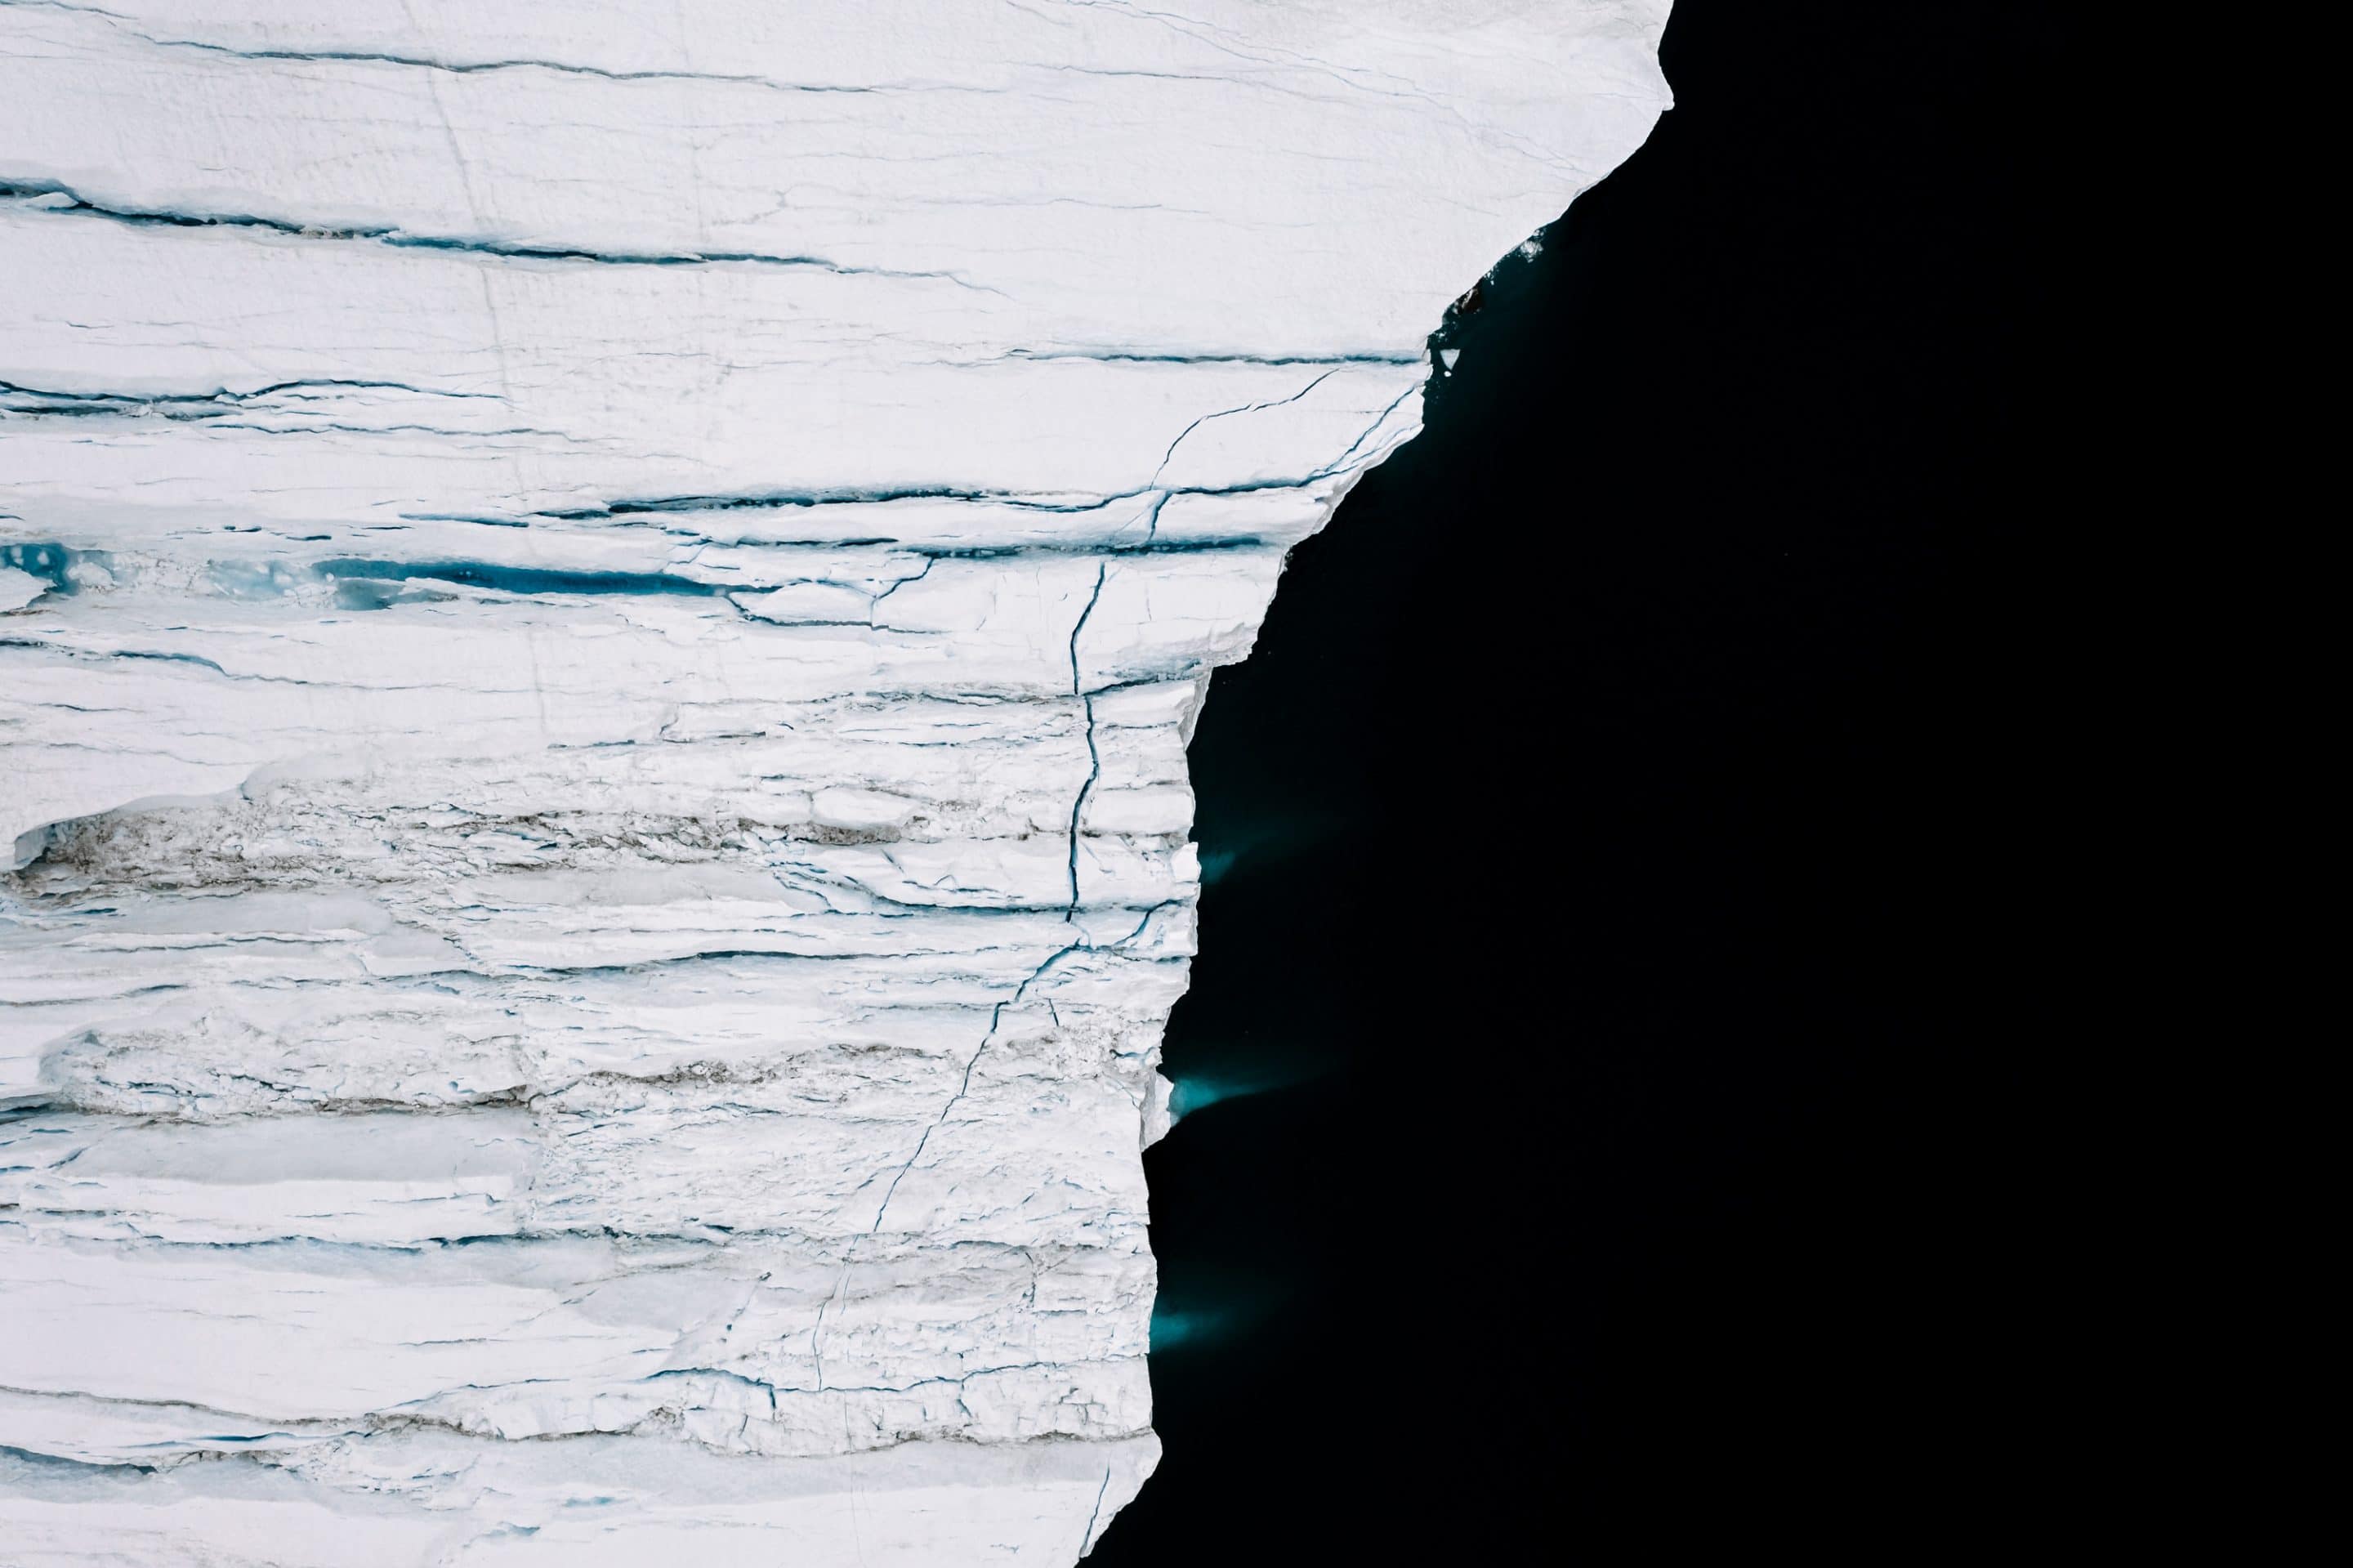 The endlessly complex landscape of abstract shapes and forms of icebergs in the Atlantic ocean at the west Greenland coast by Fine Art photographer Michael Schauer